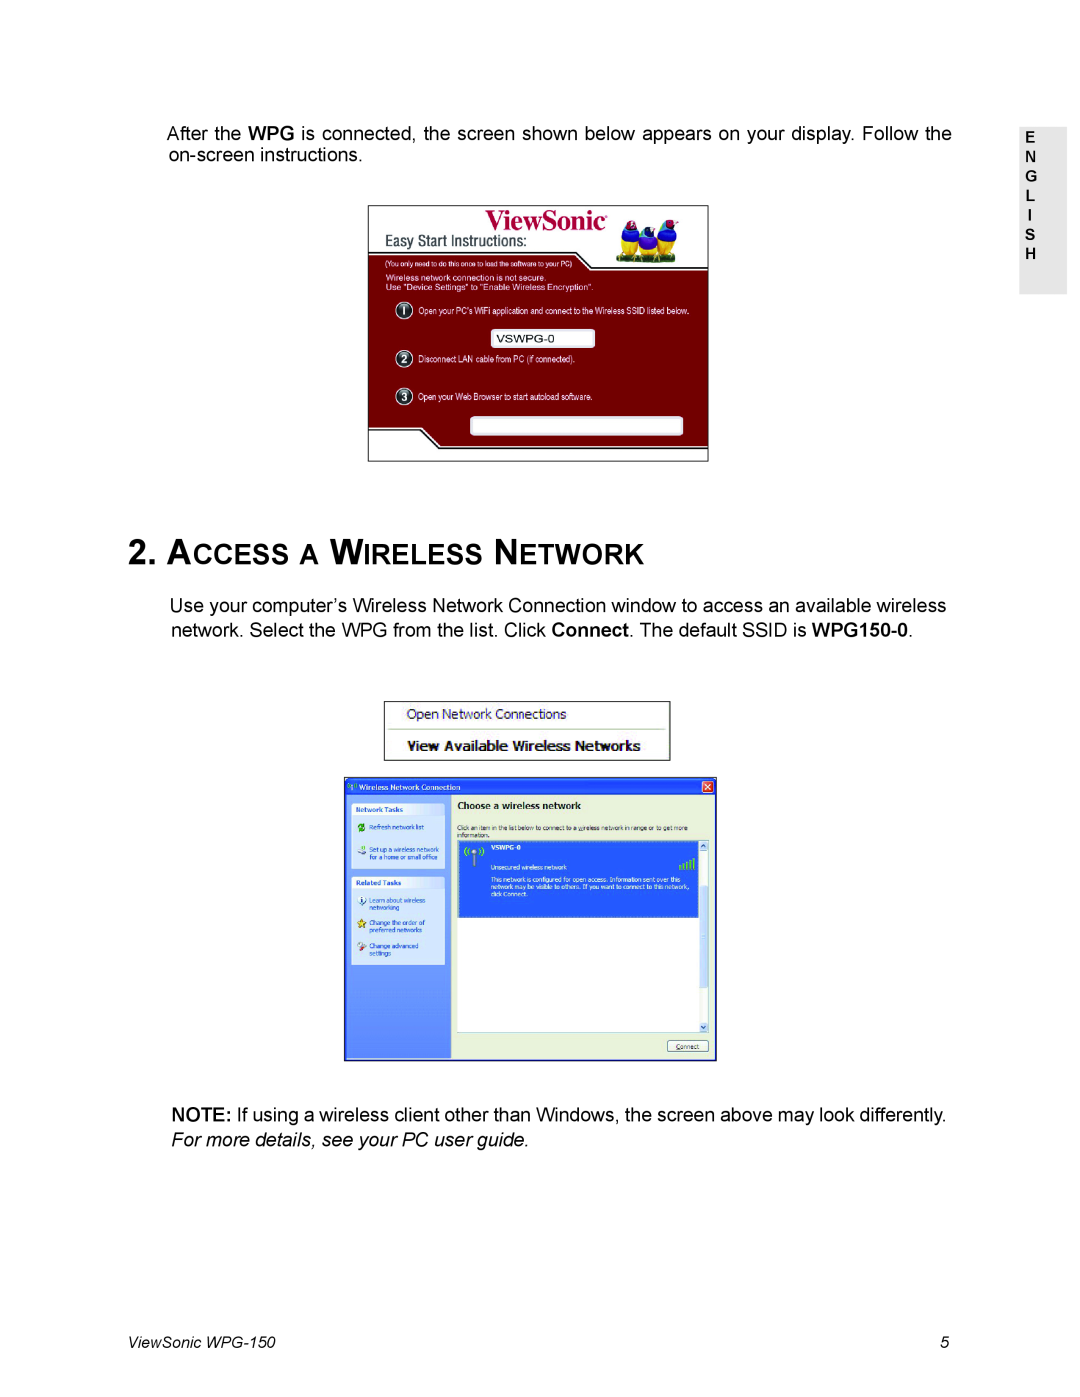 ViewSonic WPG-150 manual Access A Wireless Network, on-screen instructions 